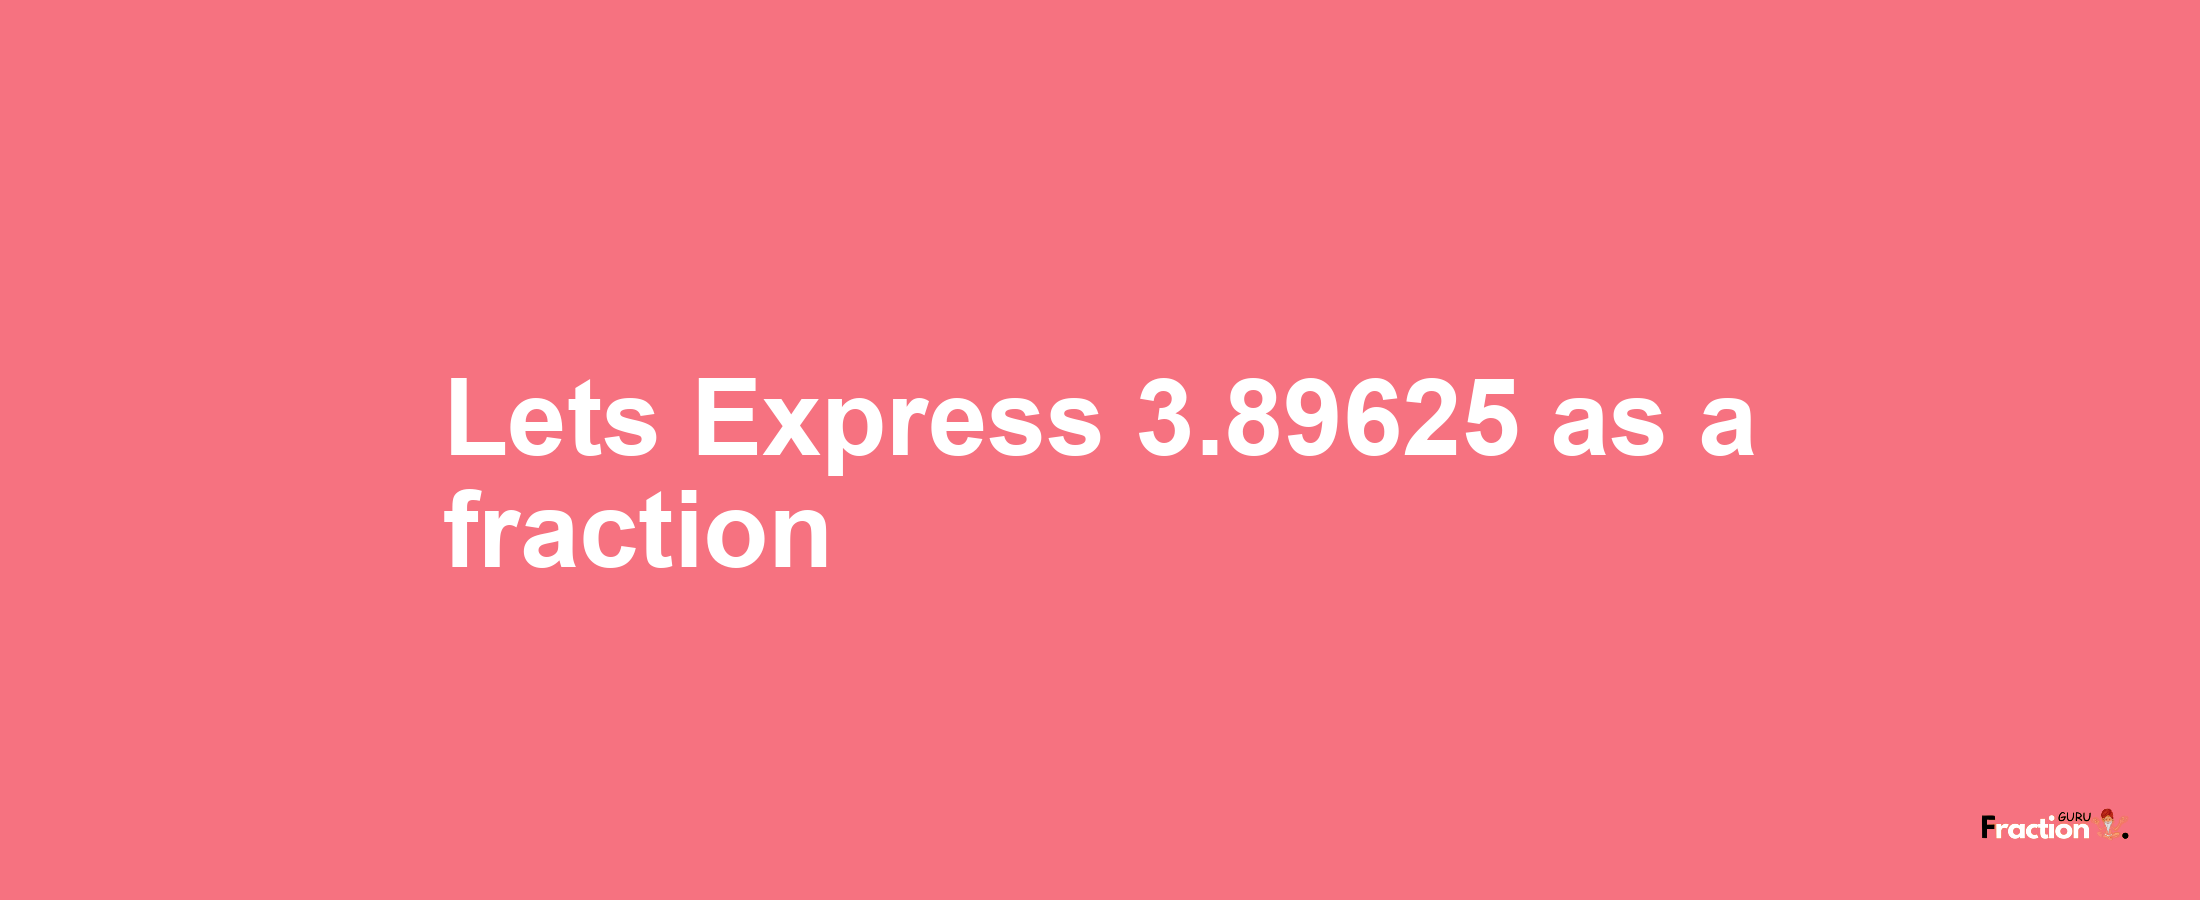 Lets Express 3.89625 as afraction